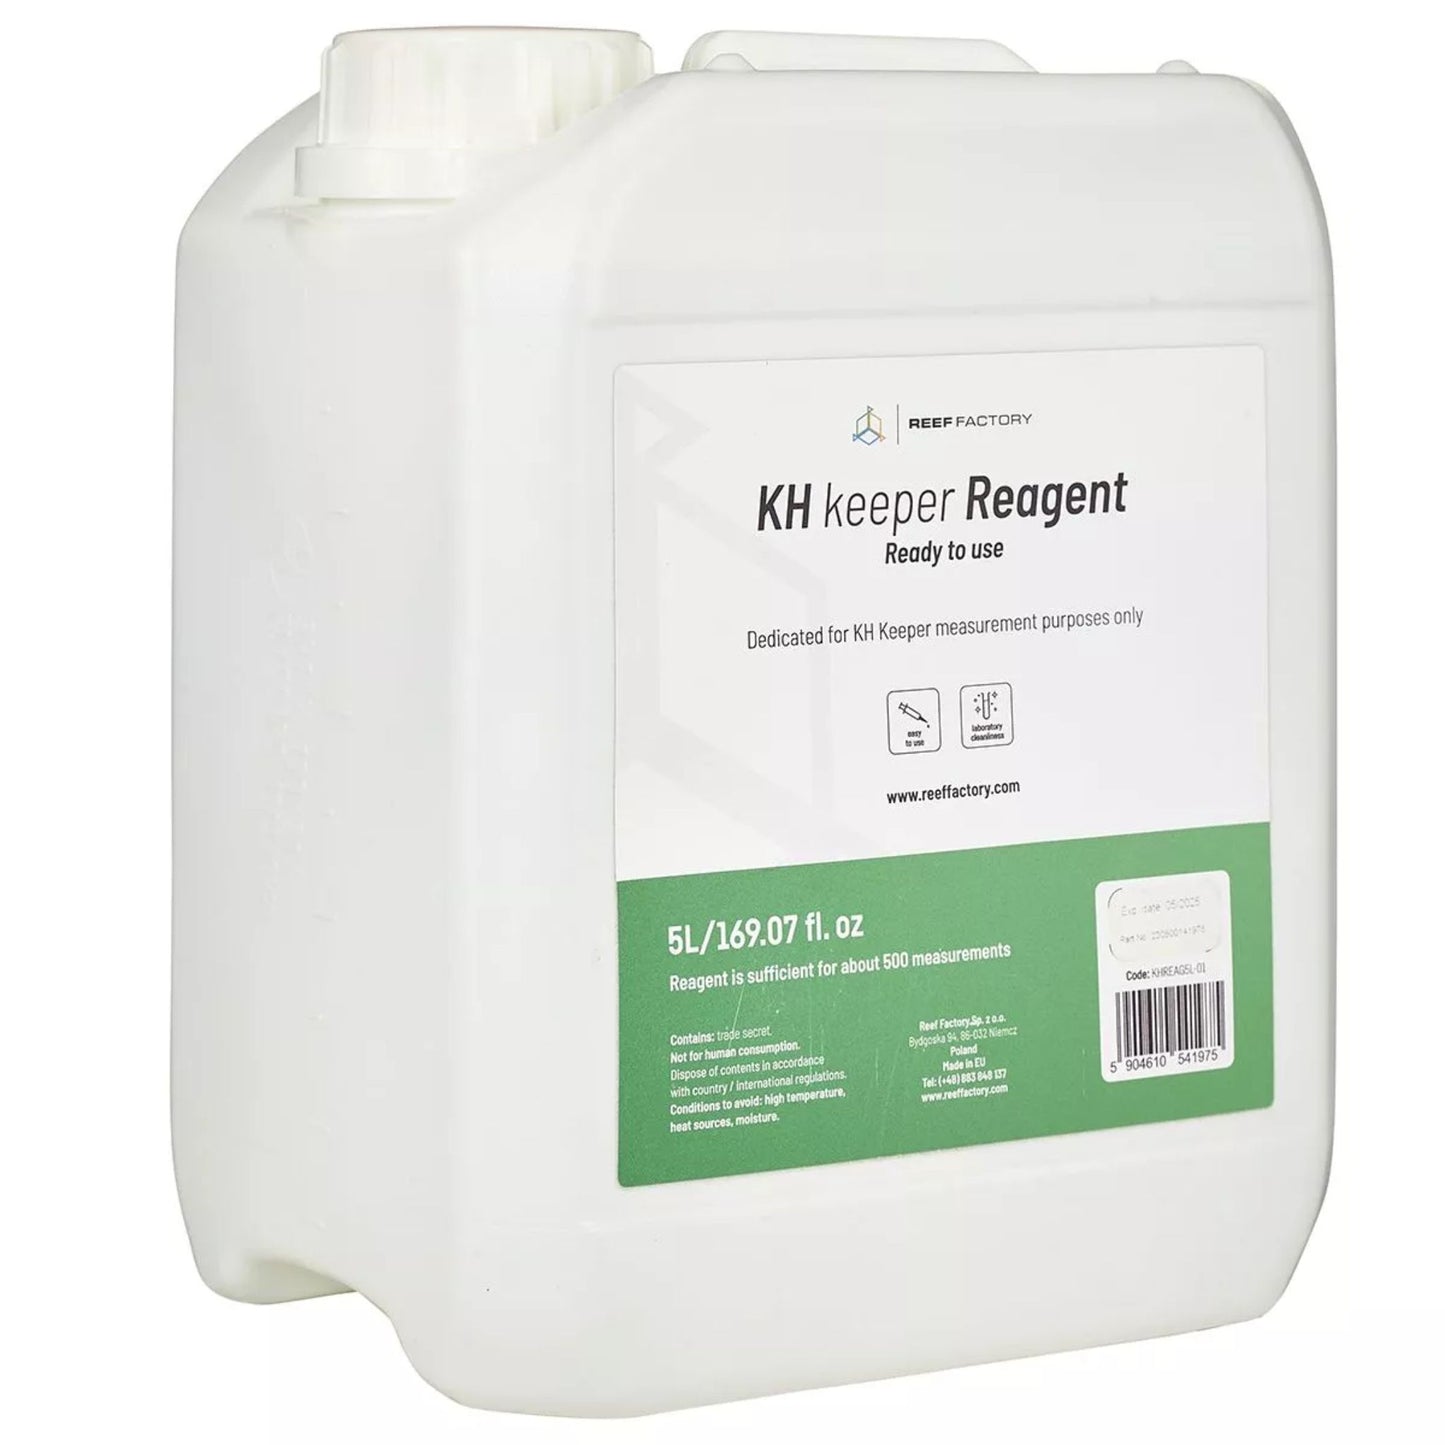 KH keeper Ready-to-Use Reagent 5L - Reef Factory